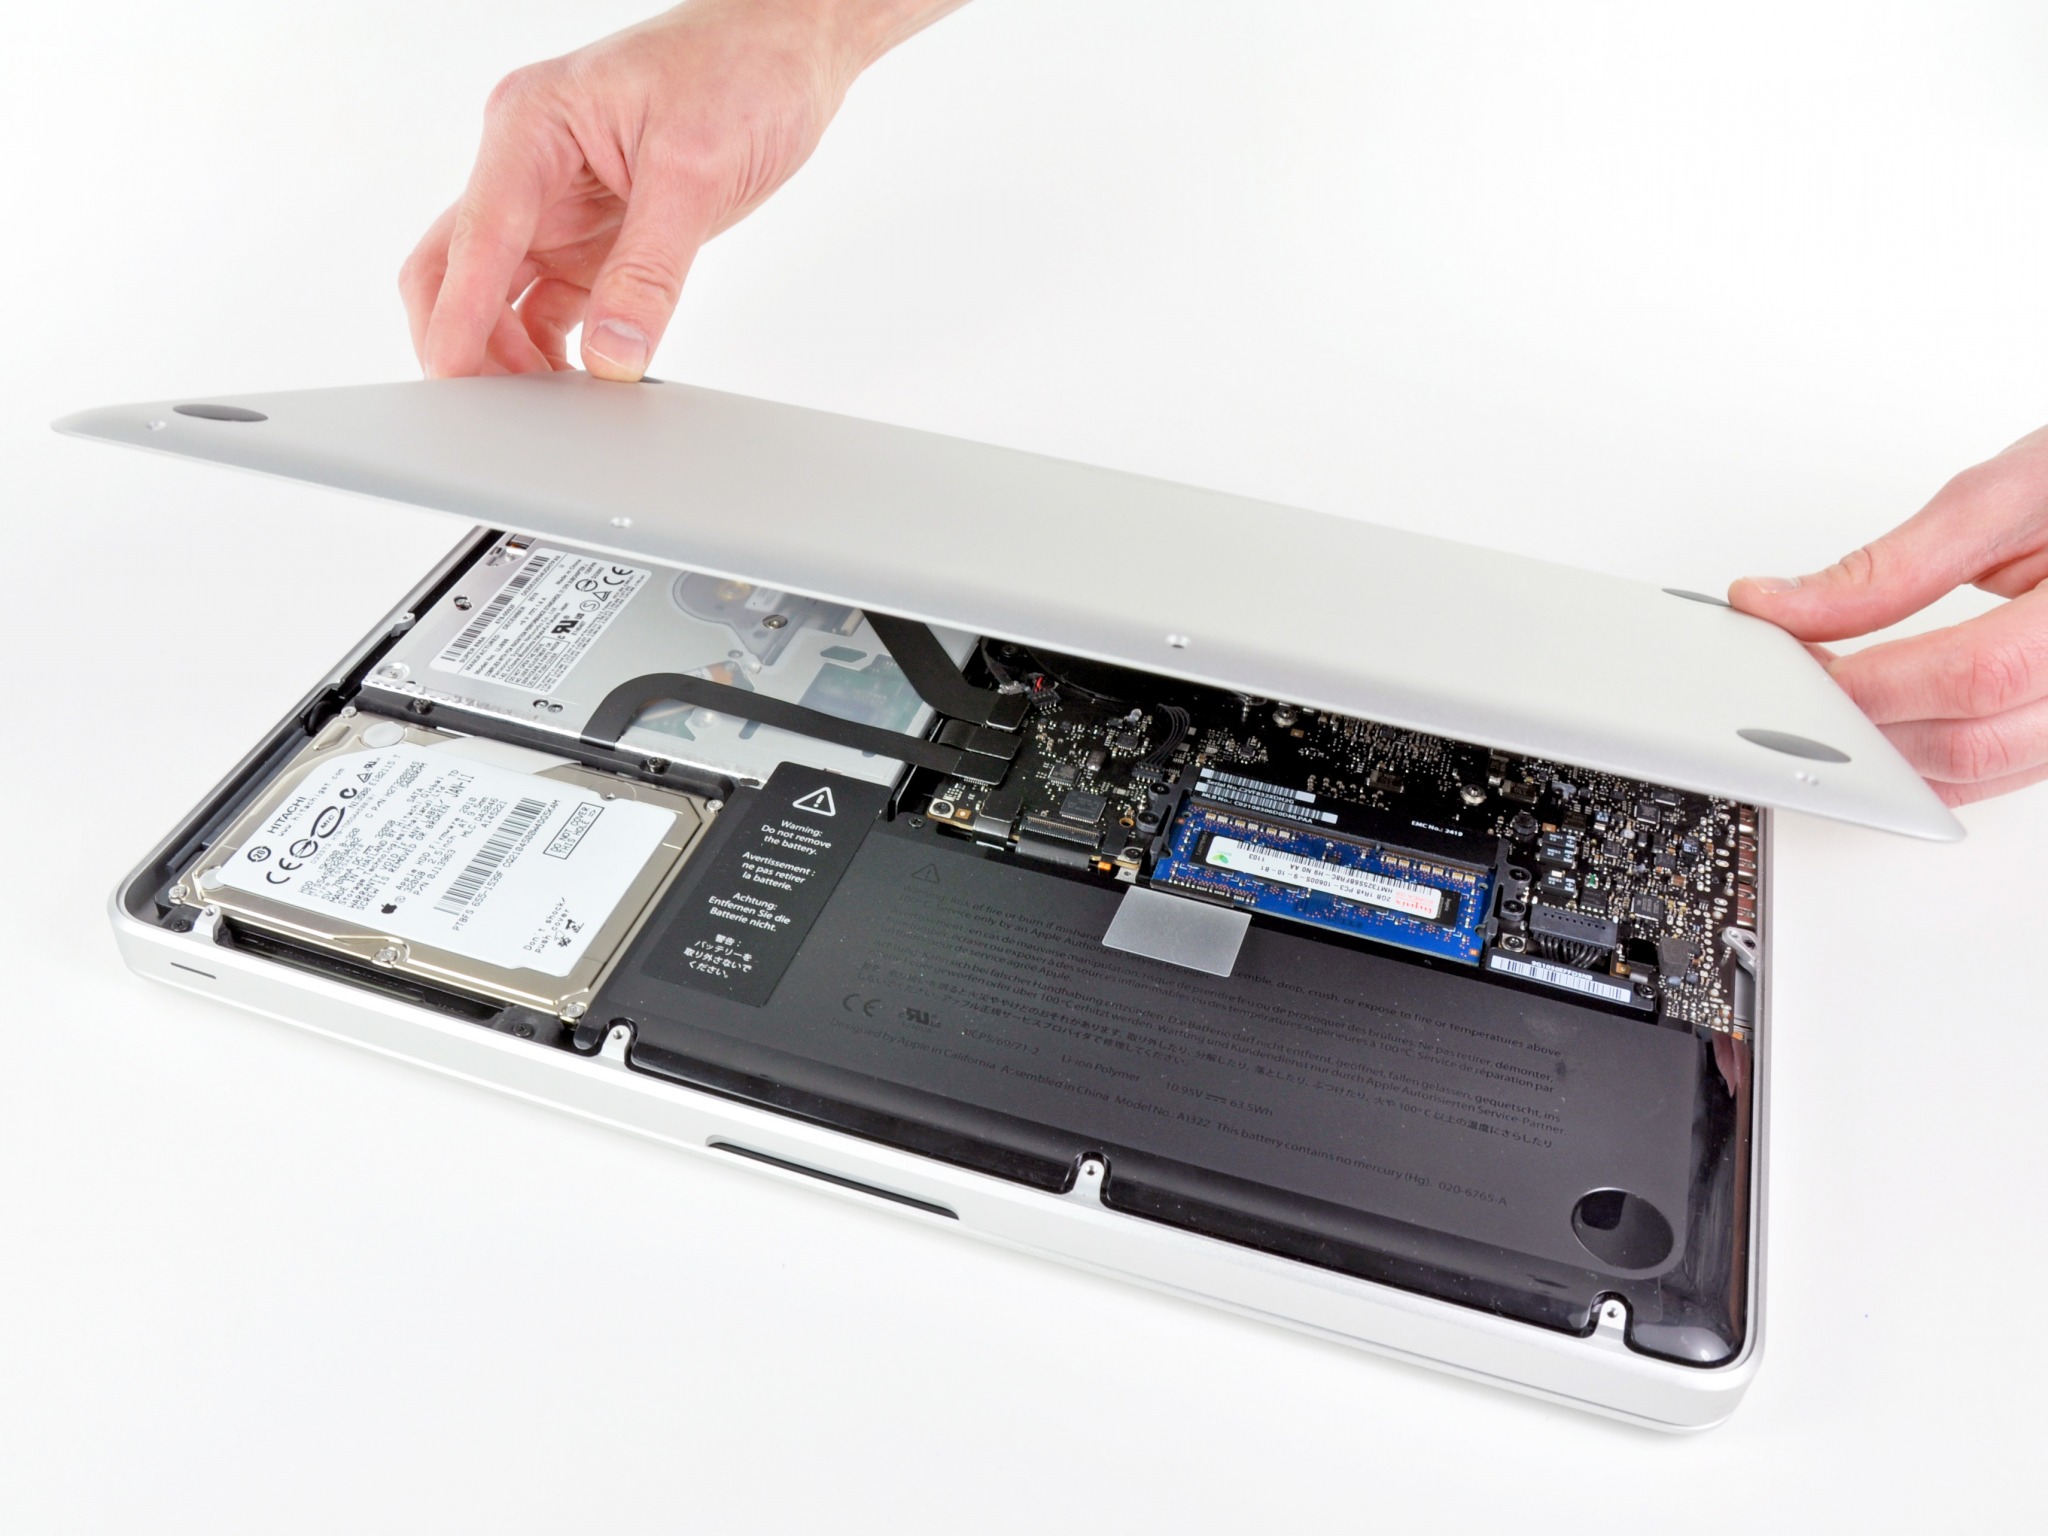 How to replace the battery in a mid-2012 Macbook Pro